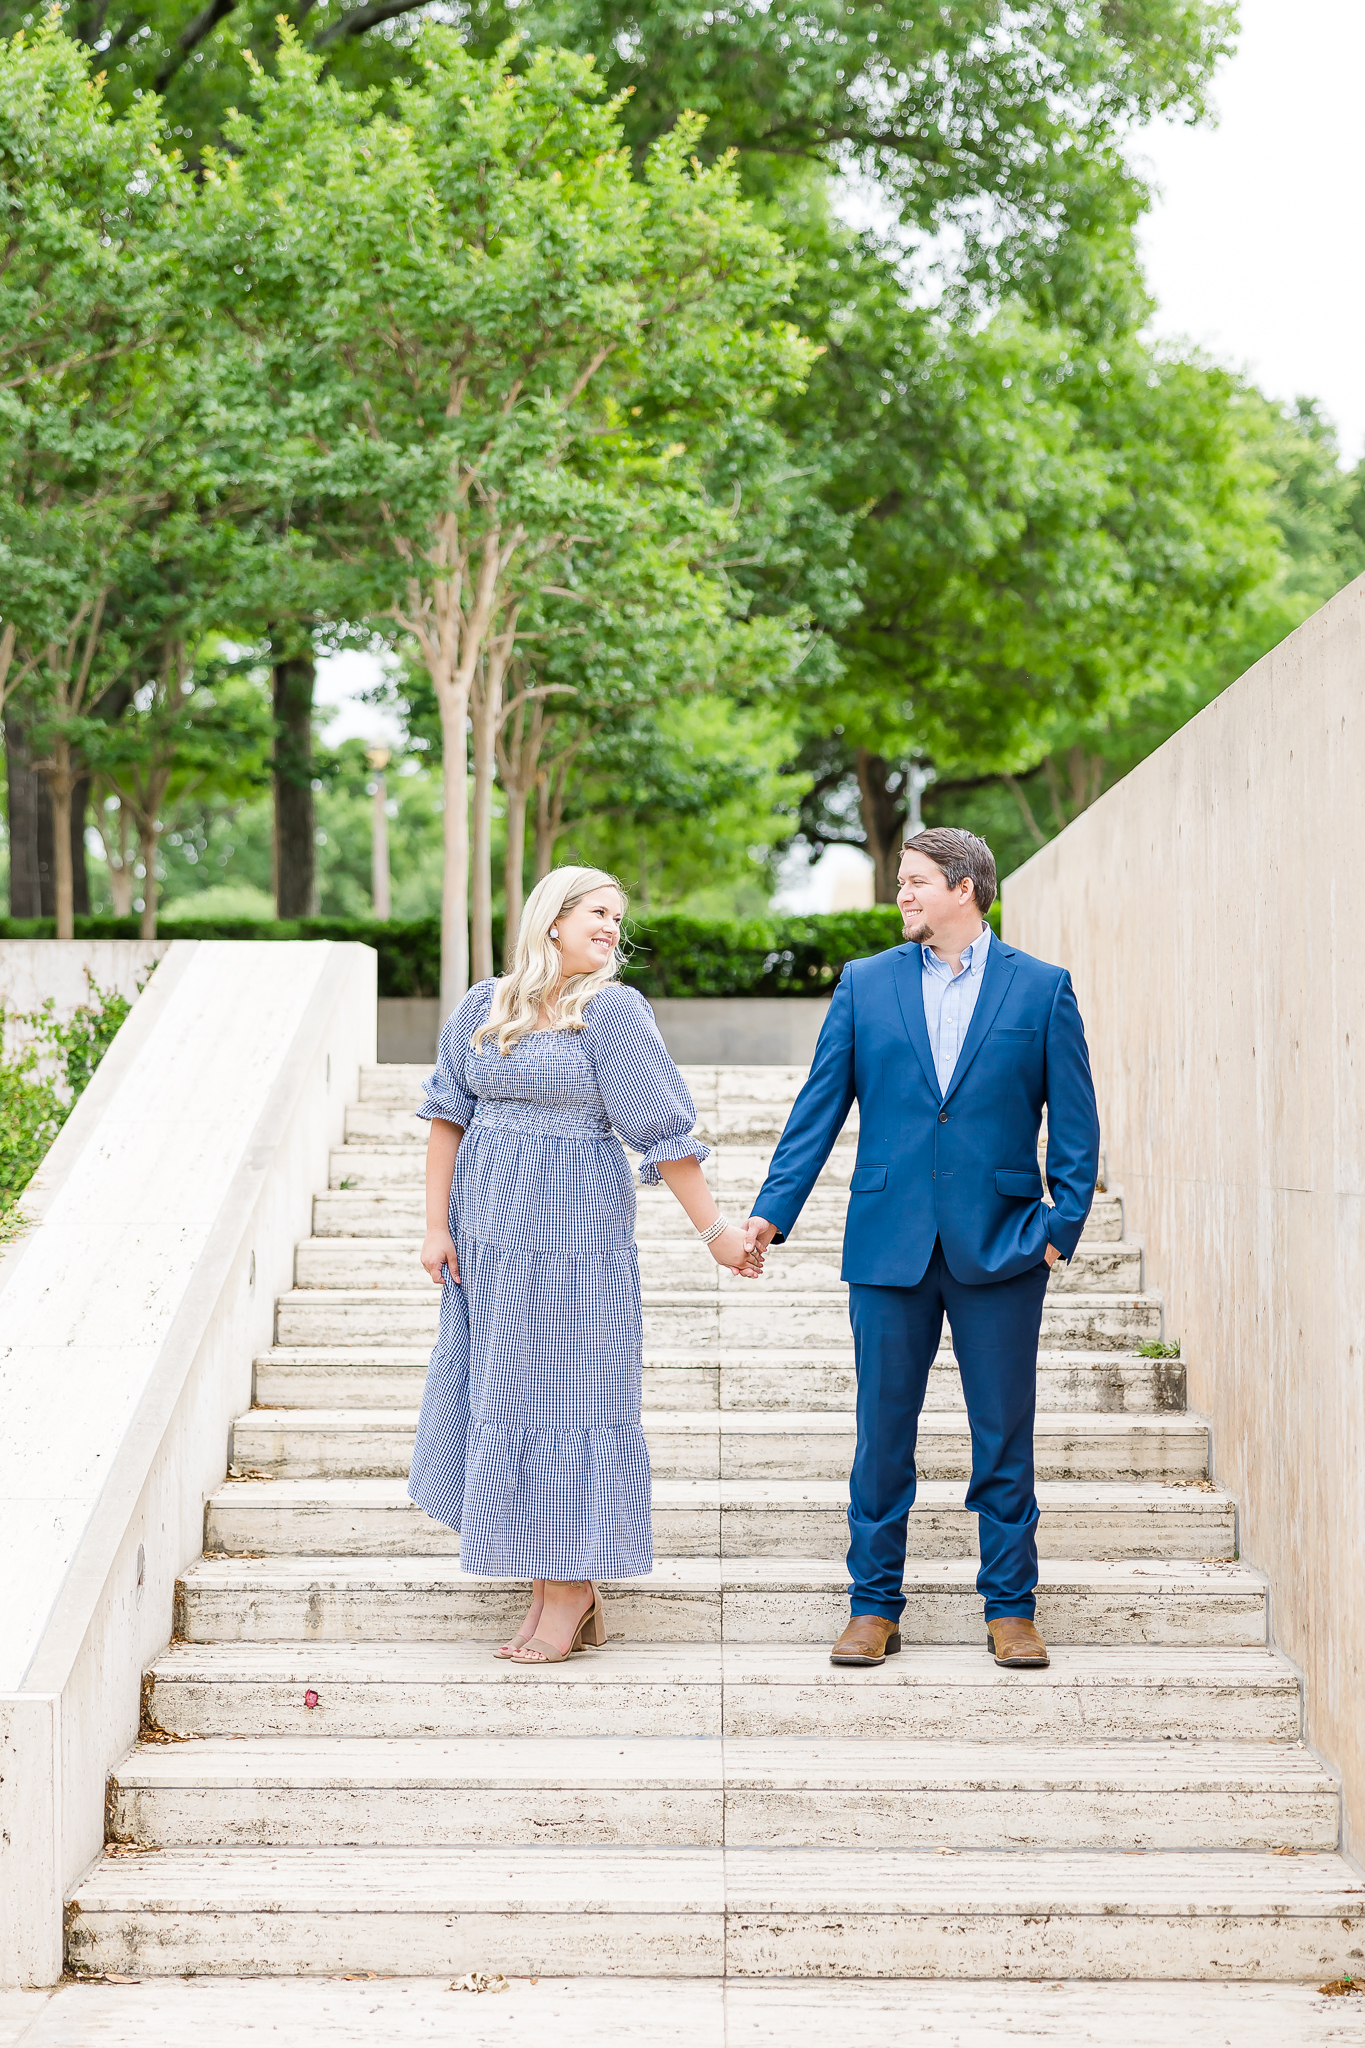 kimbell art museum engagement session, dallas wedding photographer, dallas engagement photographer, engagement session at the kimbell art museum